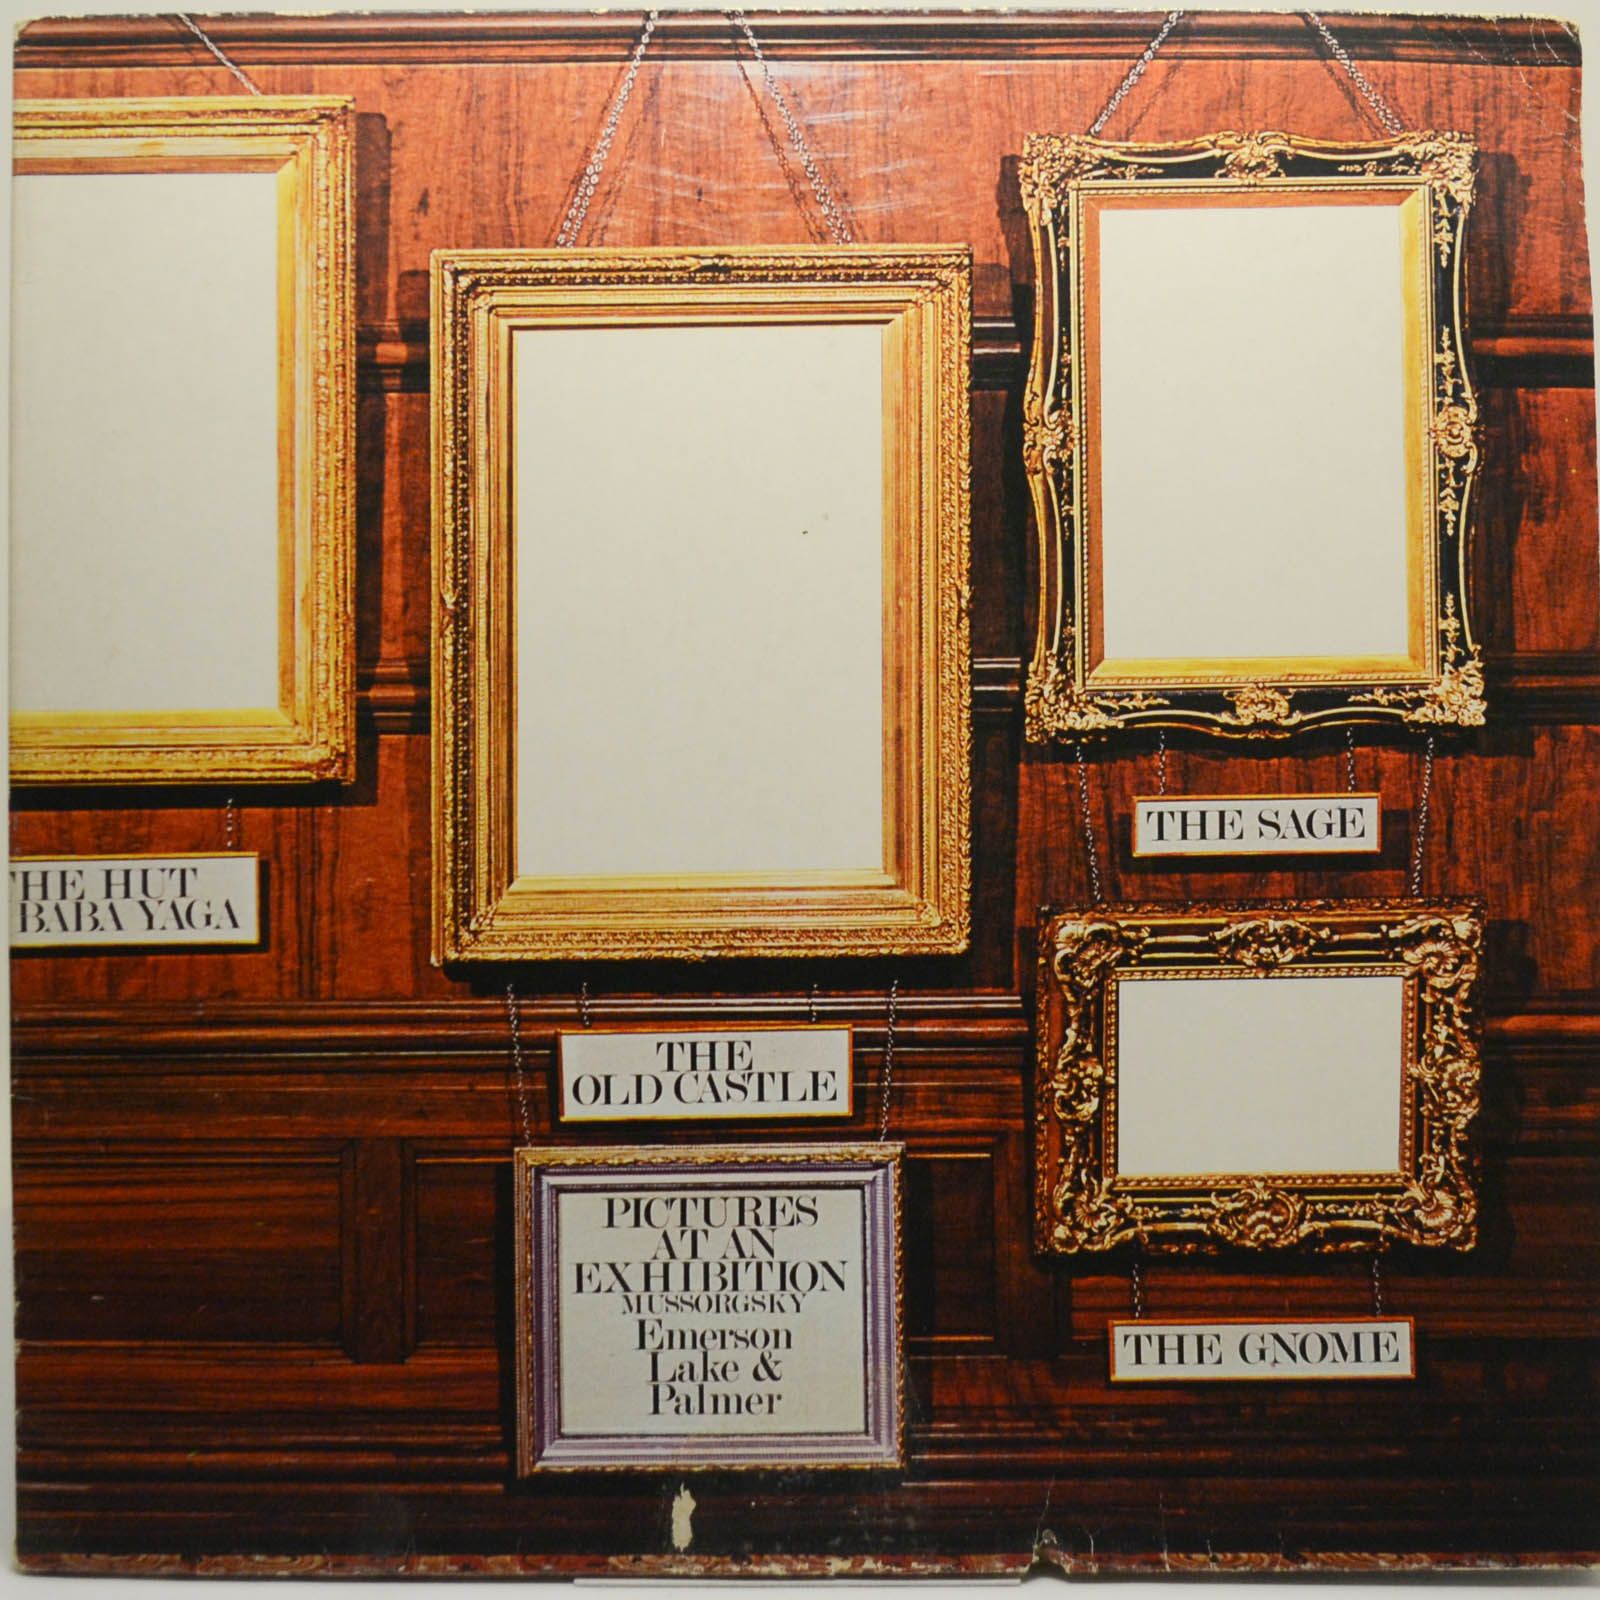 Emerson, Lake & Palmer — Pictures At An Exhibition, 1971